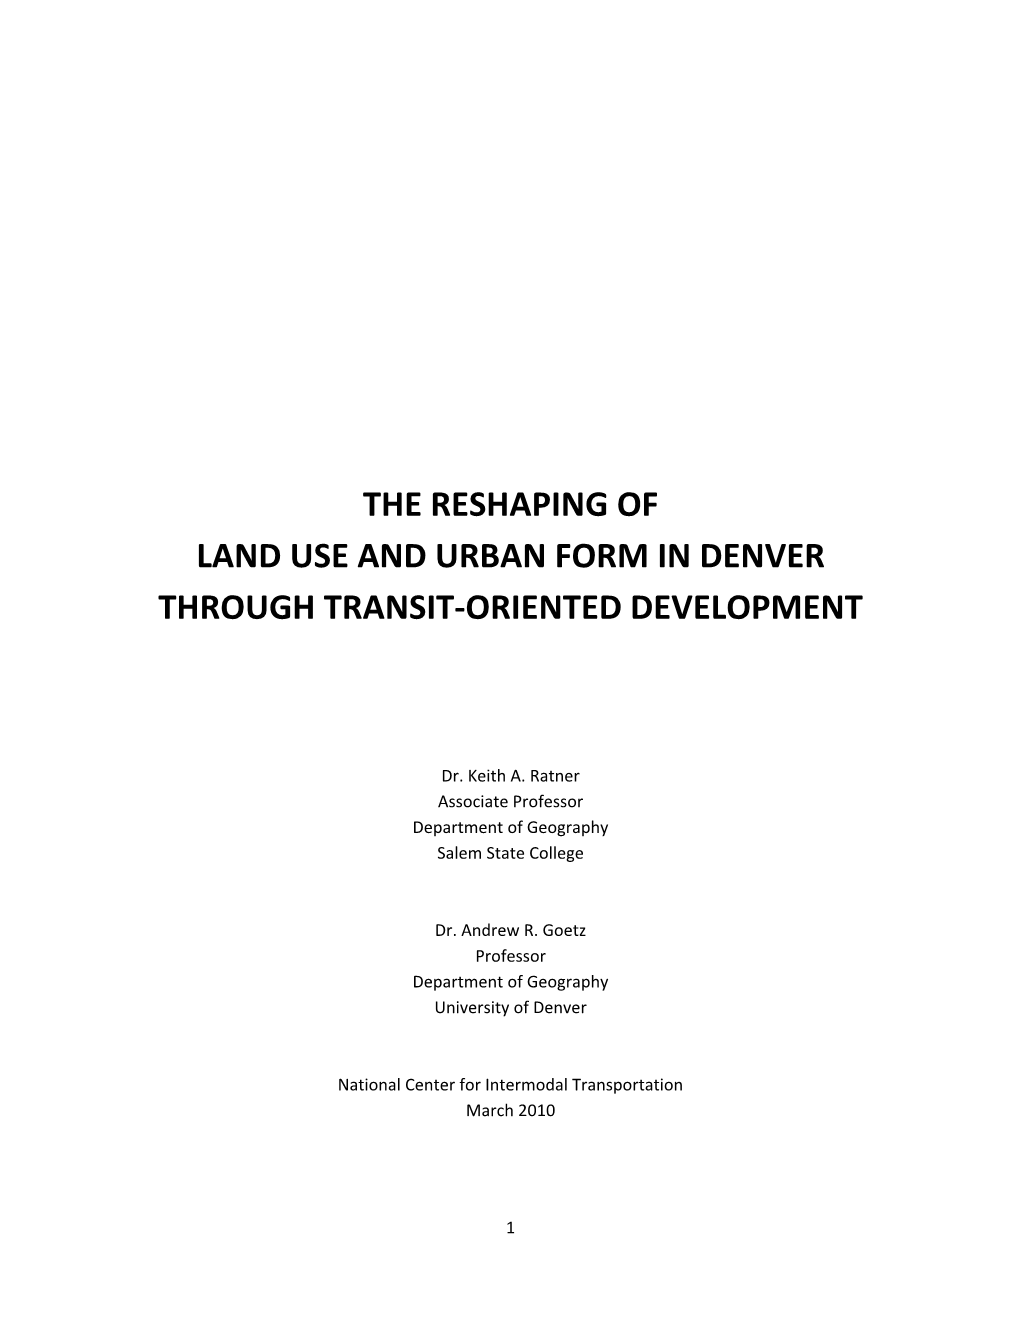 The Reshaping of Land Use and Urban Form in Denver Through Transit-Oriented Development